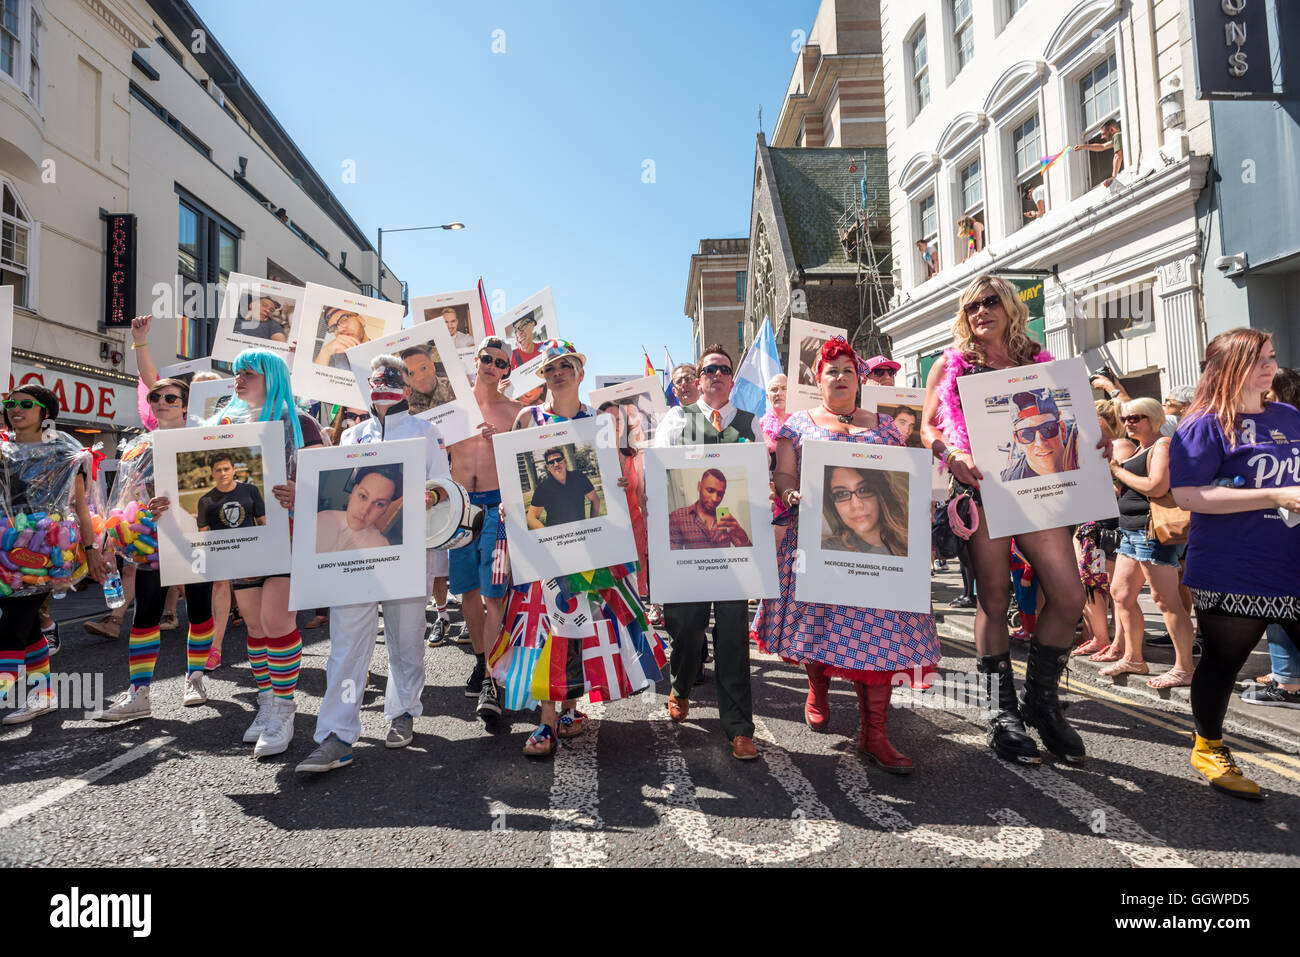 The Gay Pride march in Brighton, the UK's biggest Pride event, this year attended by more than a quarter of a million people. Stock Photo